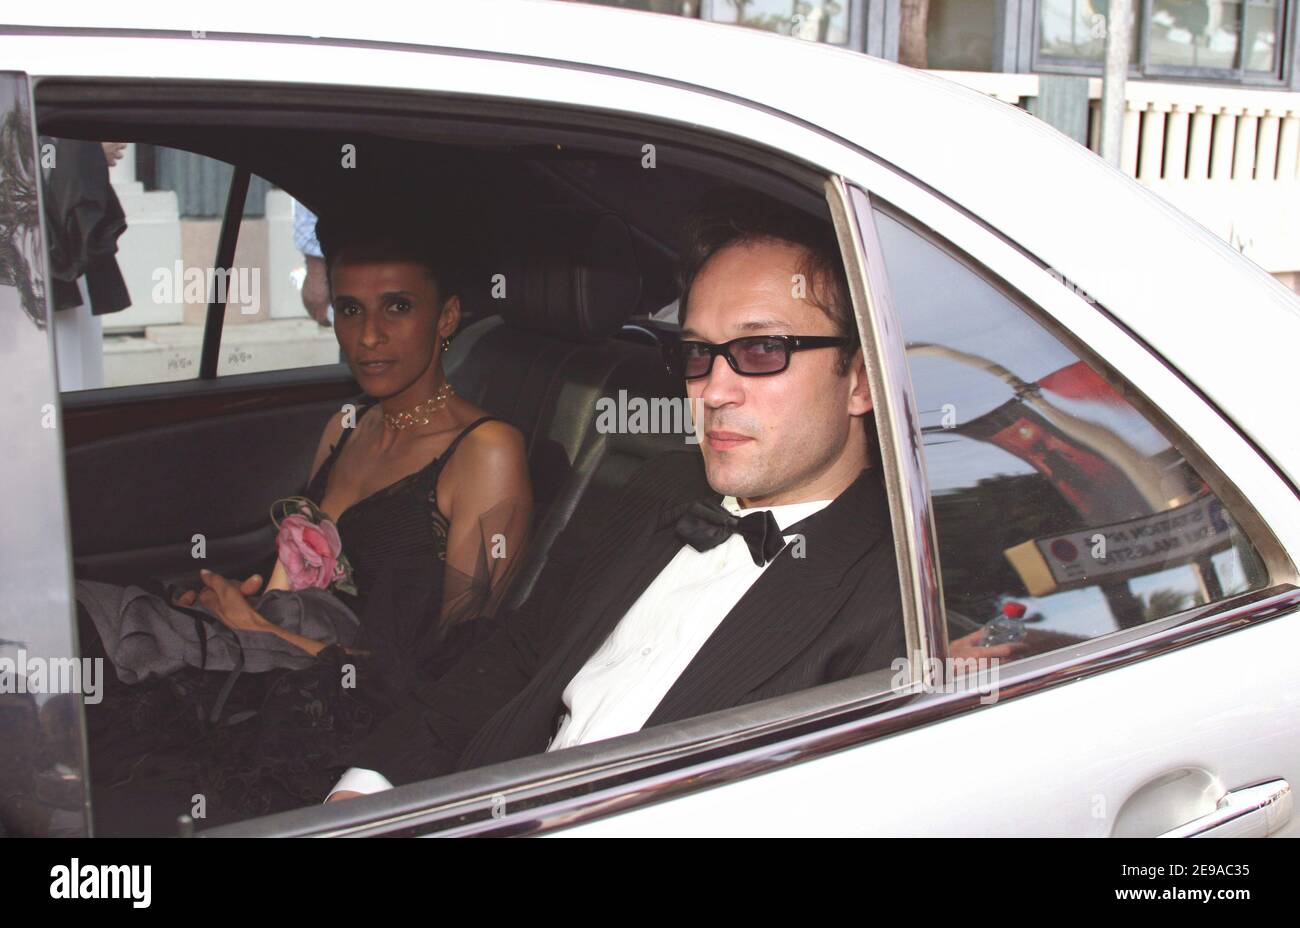 Swiss Actor Vincent Perez and wife arrive at the Palais des Festivals for the screening of the movie 'Selon Charlie' directed by Nicole Garcia in competition for the 59th Film Festival of Cannes on May 19, 2006. Photo by Benoit Pinguet/ABACAPRESS.COM Stock Photo